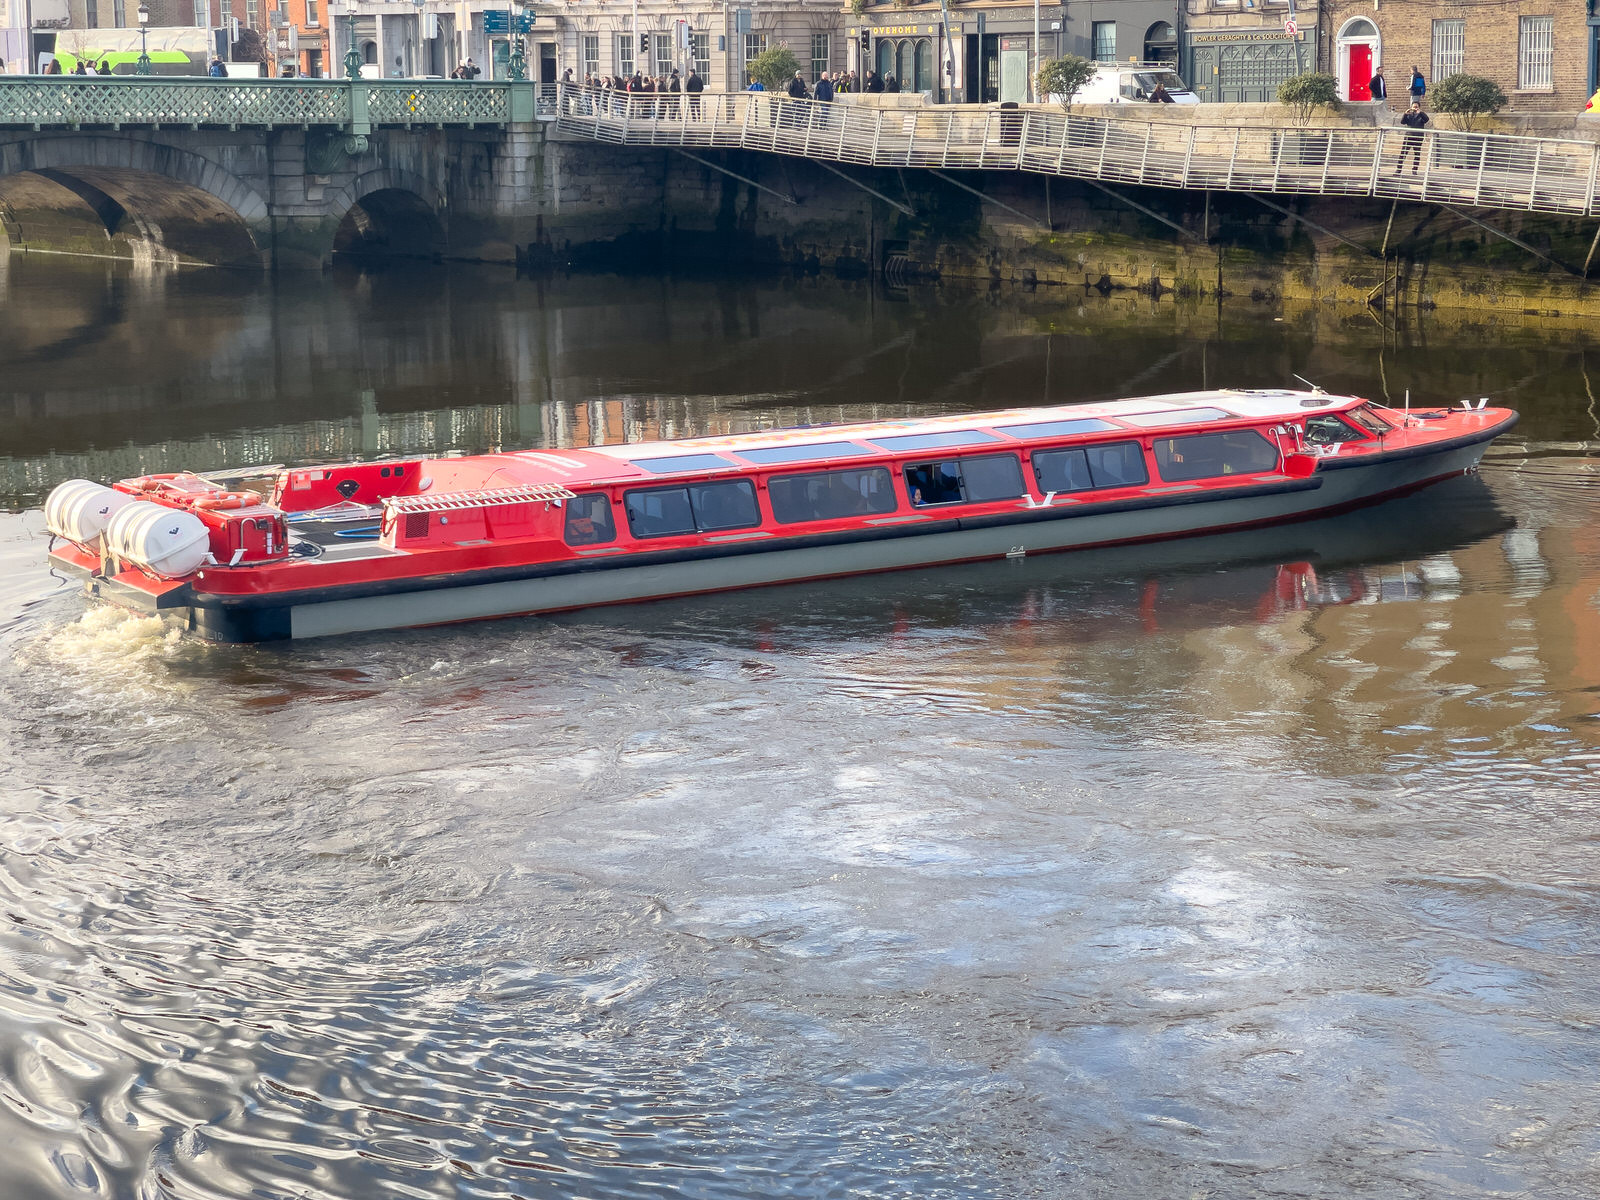 I HAD NOTHING BETTER TO DO [SO I PHOTOGRAPHED THE SPIRIT OF THE DOCKLANDS TURNING ON THE RIVER LIFFEY]-229457-1